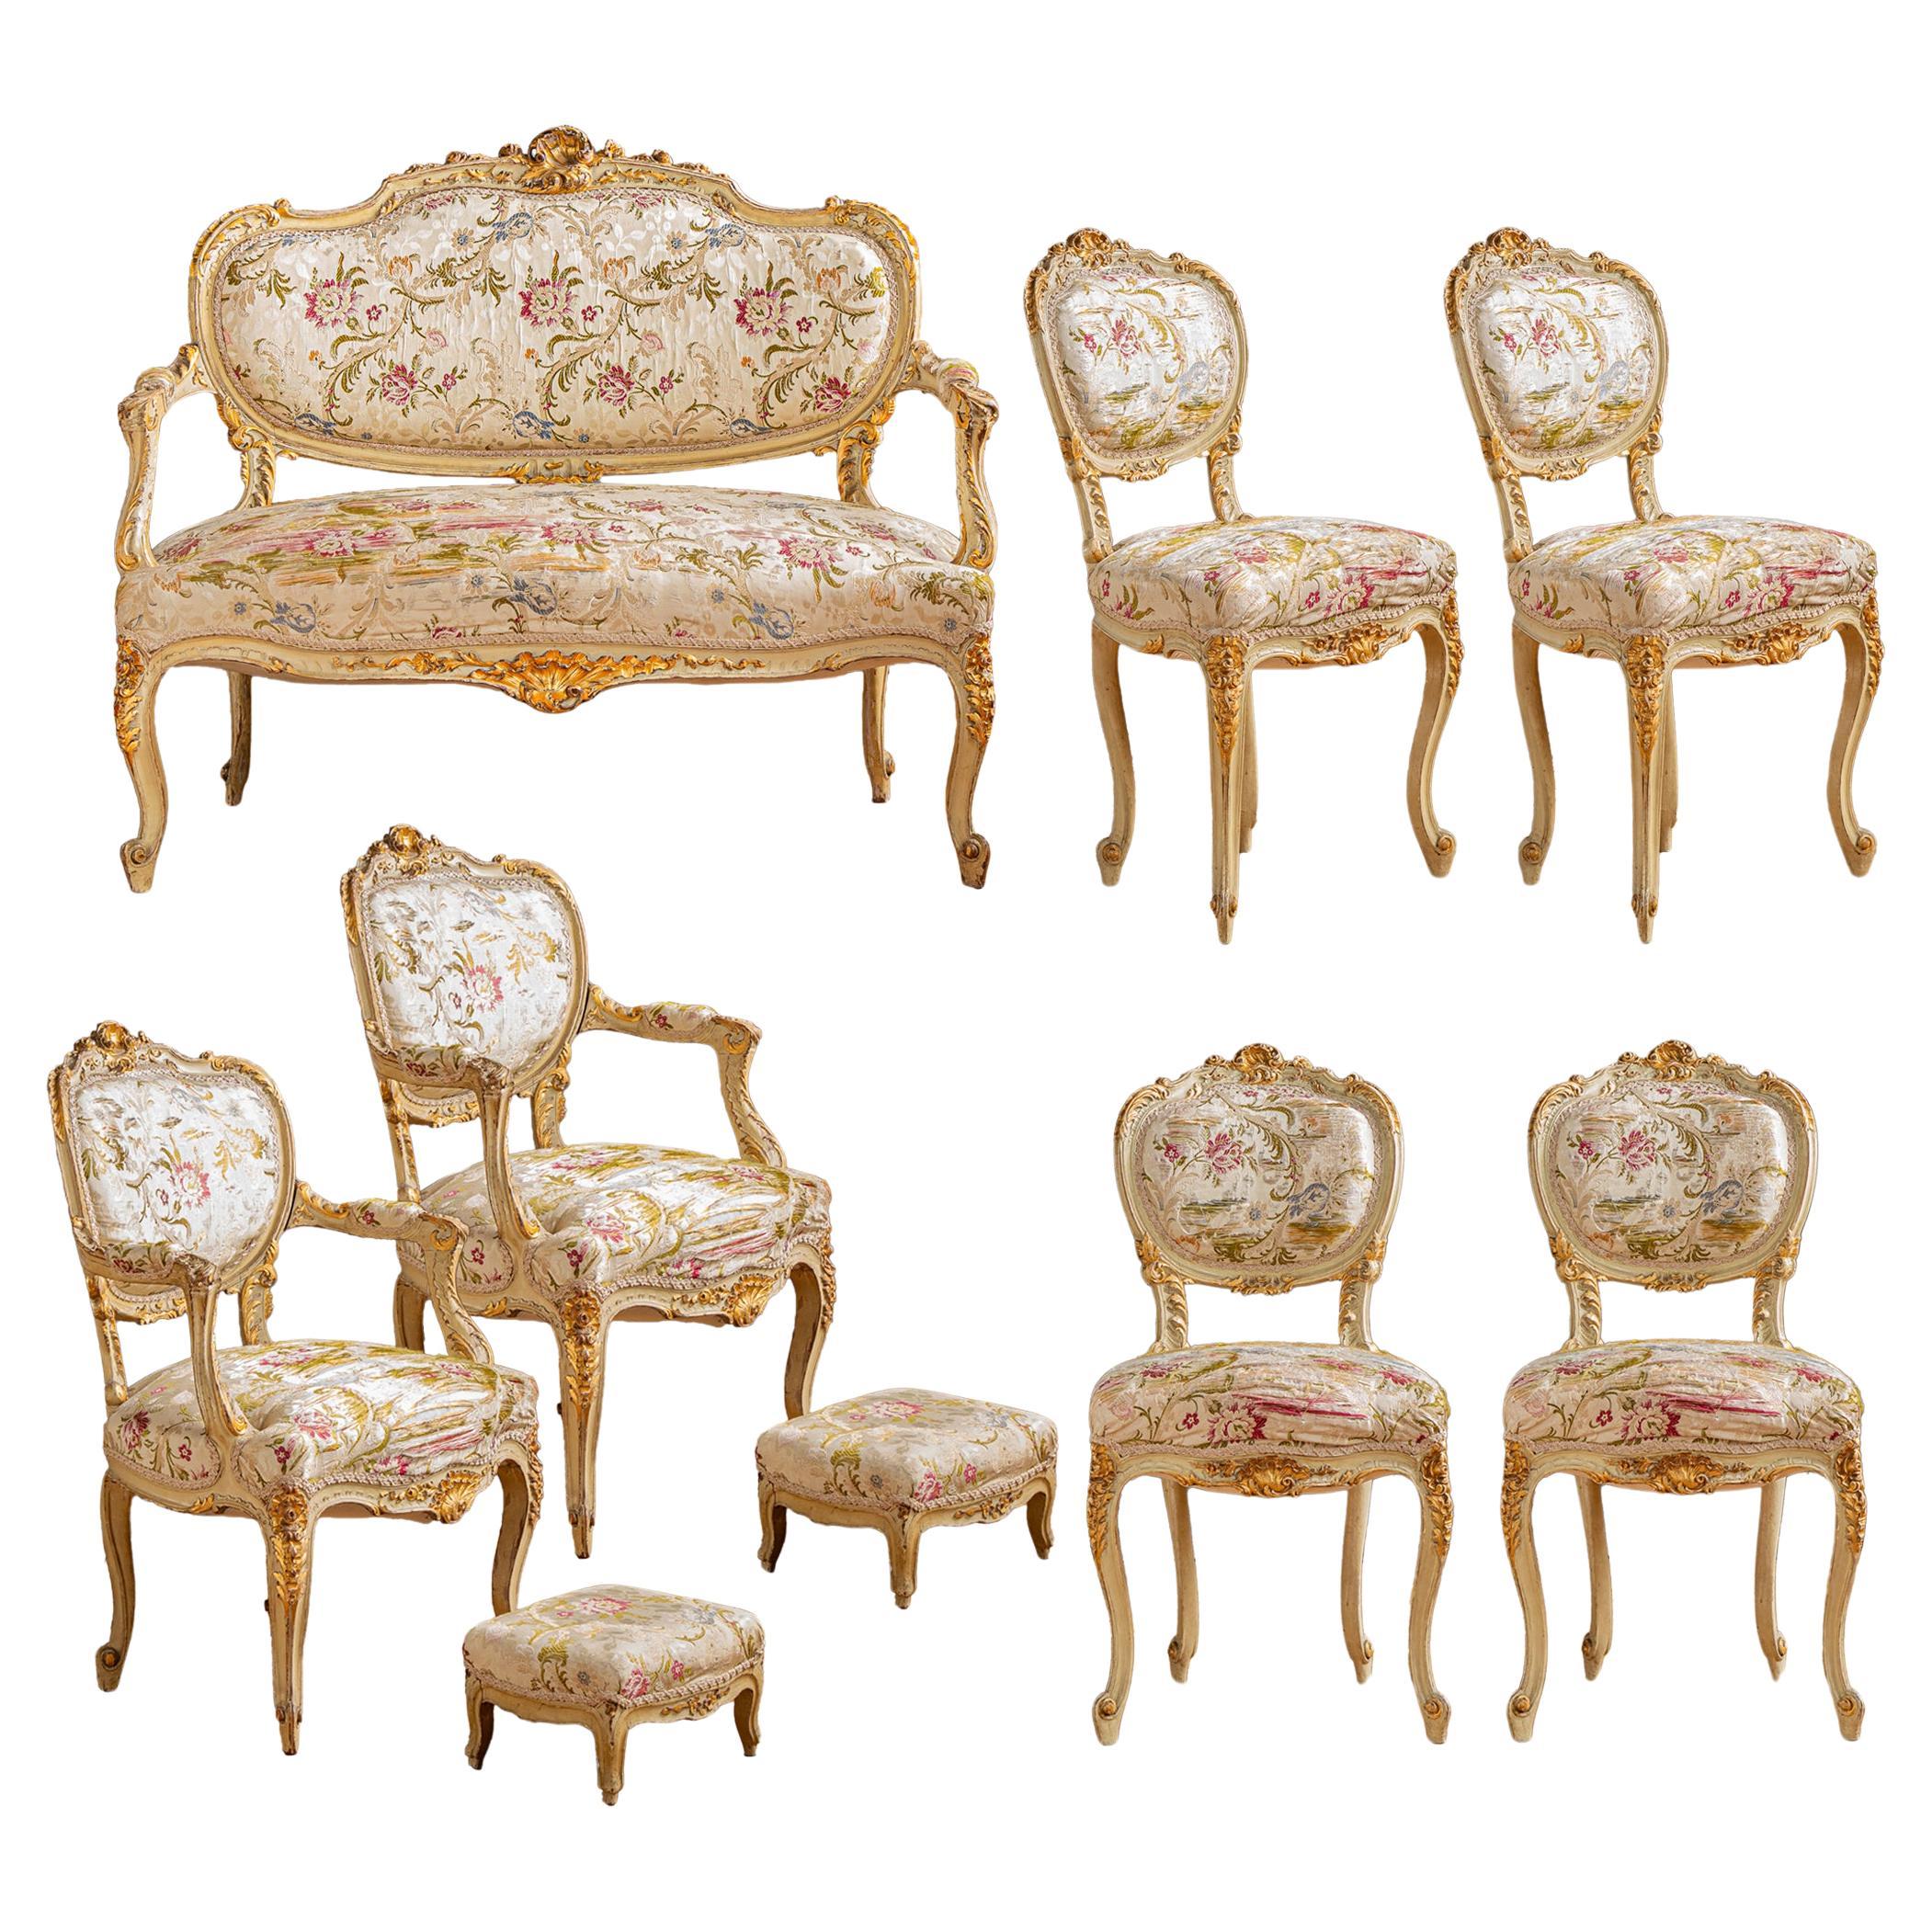 19th Century Italian Carved Gilt-wood Salon Suite - Sofa, Chairs & Footstools  For Sale